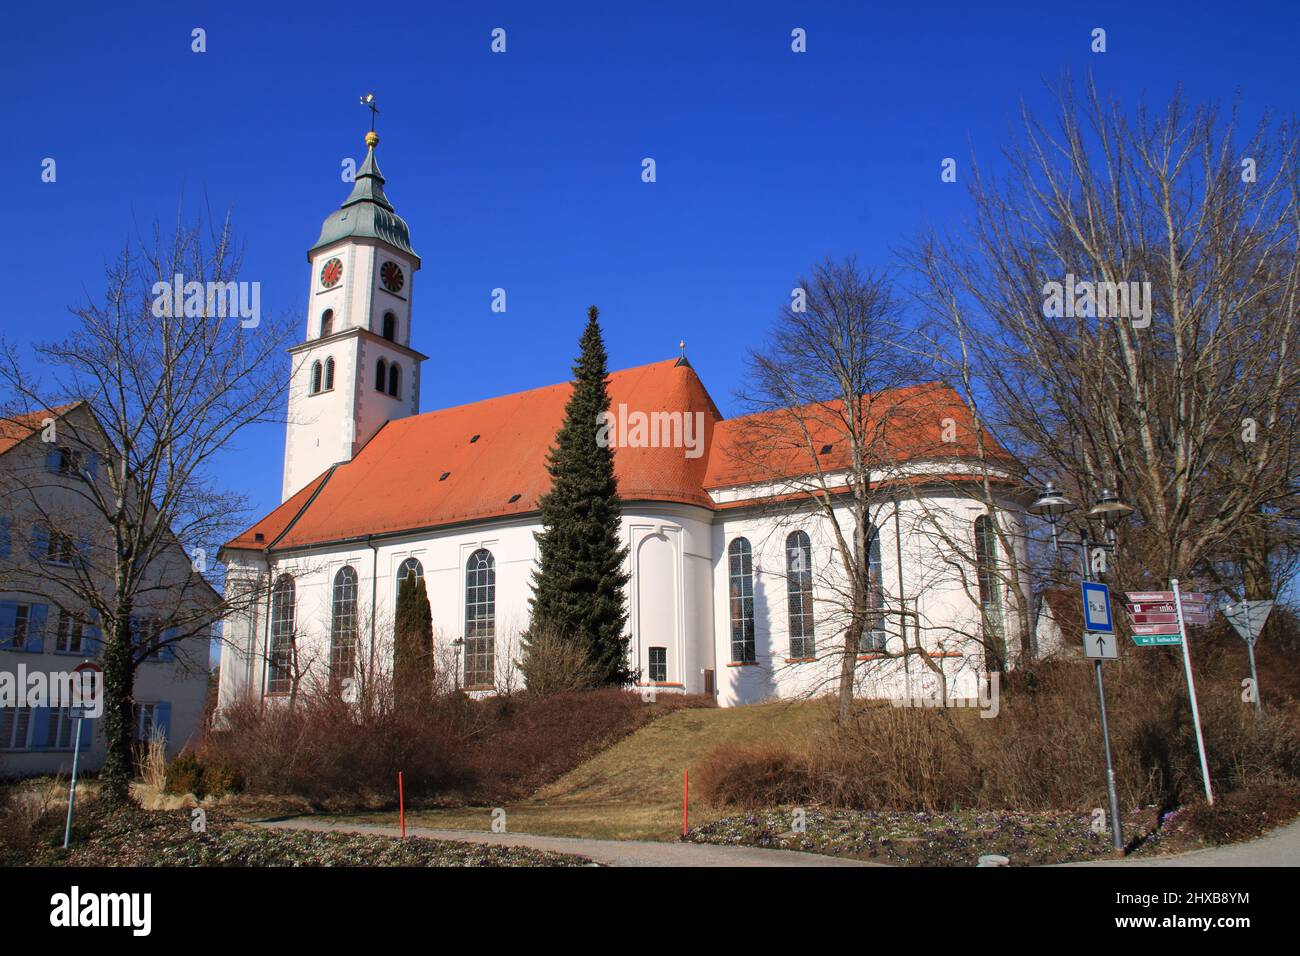 The Catholic Church of St. Verena in Bad Wurzach Stock Photo